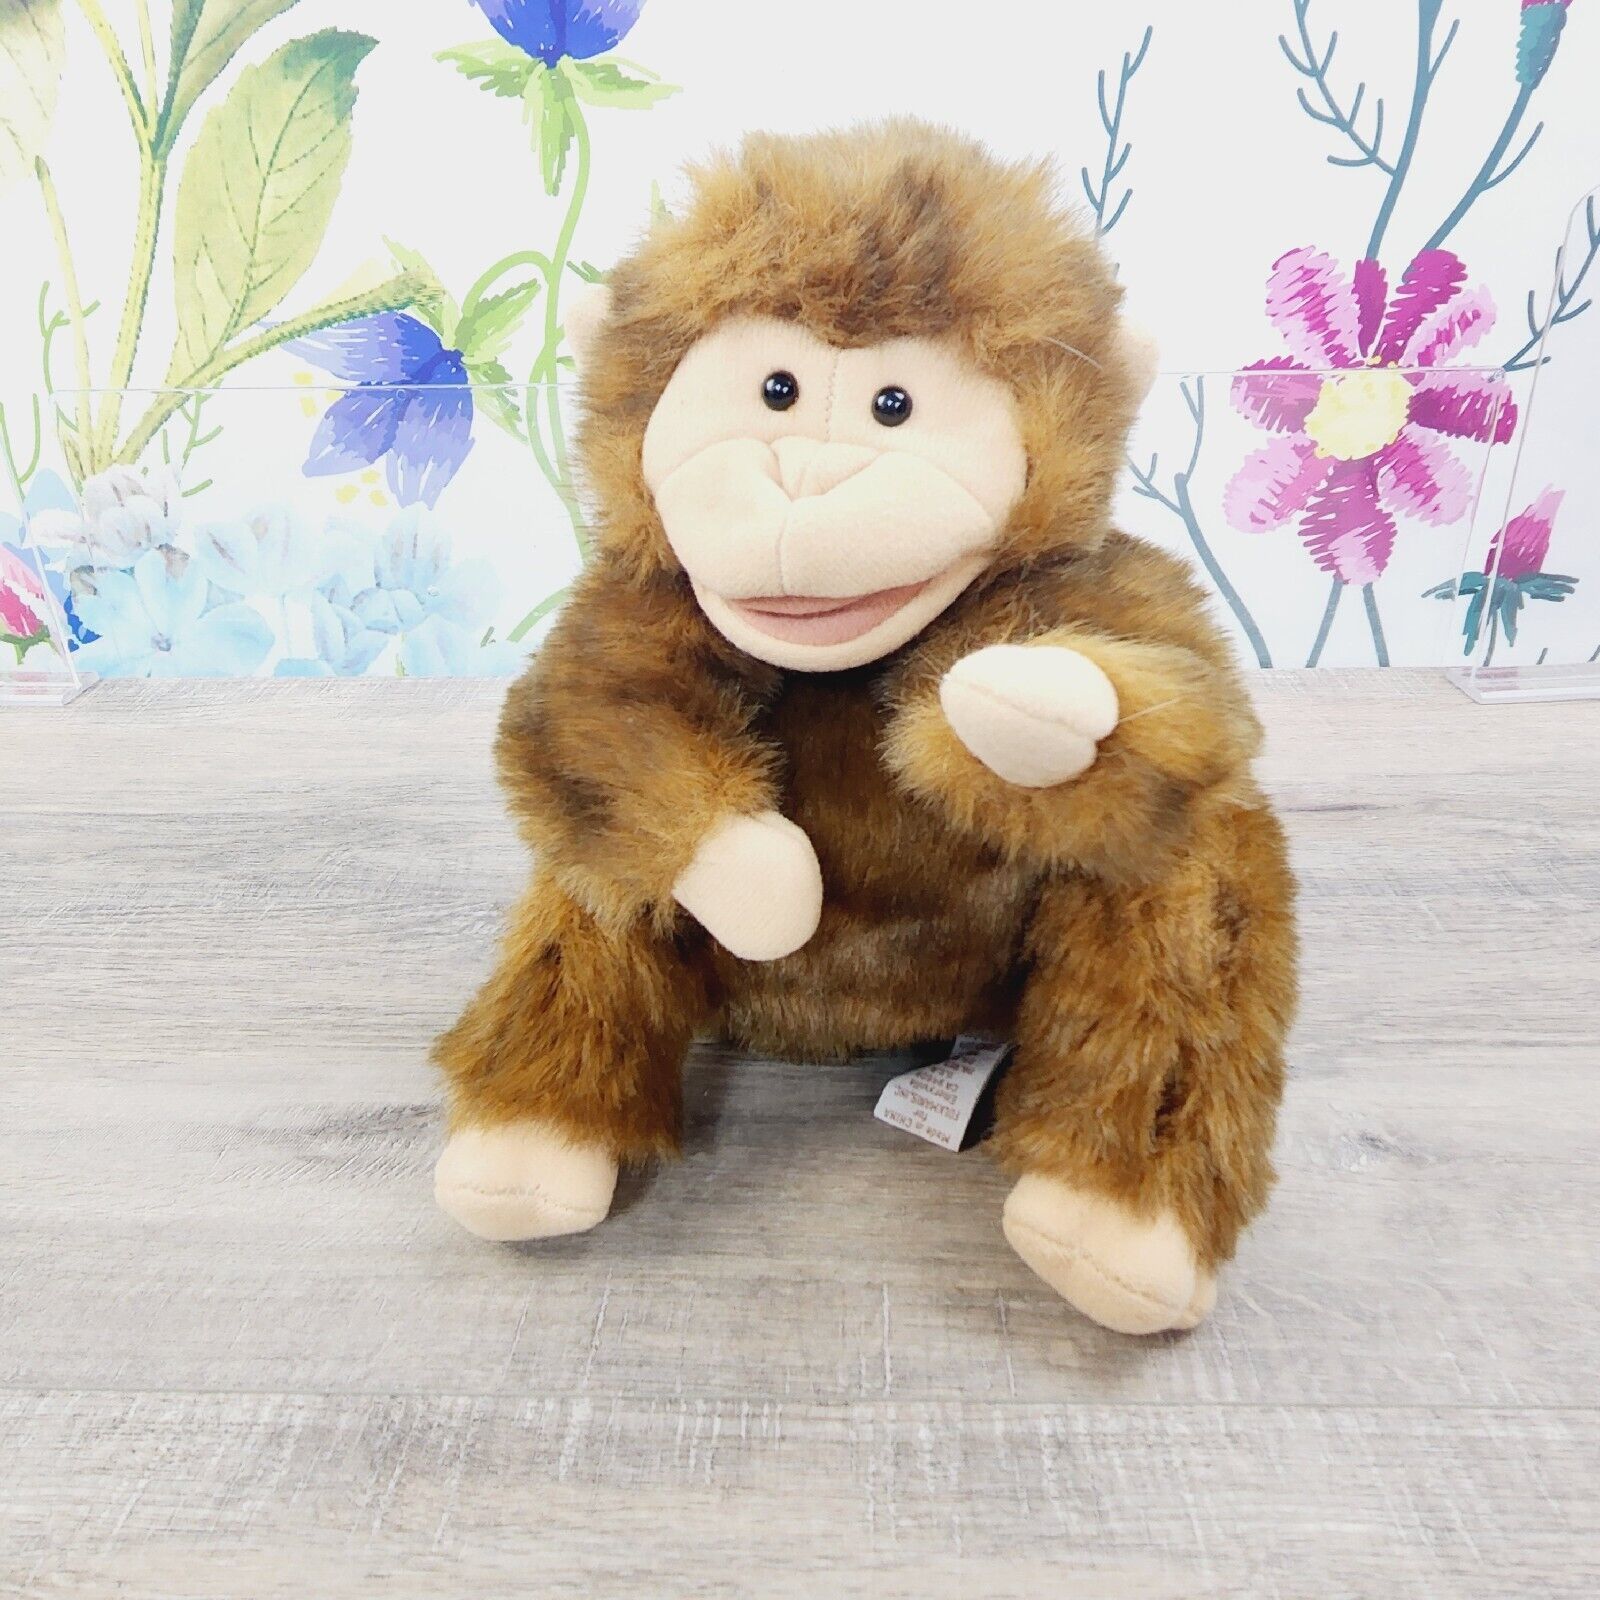 Primary image for Folkmanis Folktails Monkey Hand Puppet Plush 10" Brown Long Tail Stuffed Animal